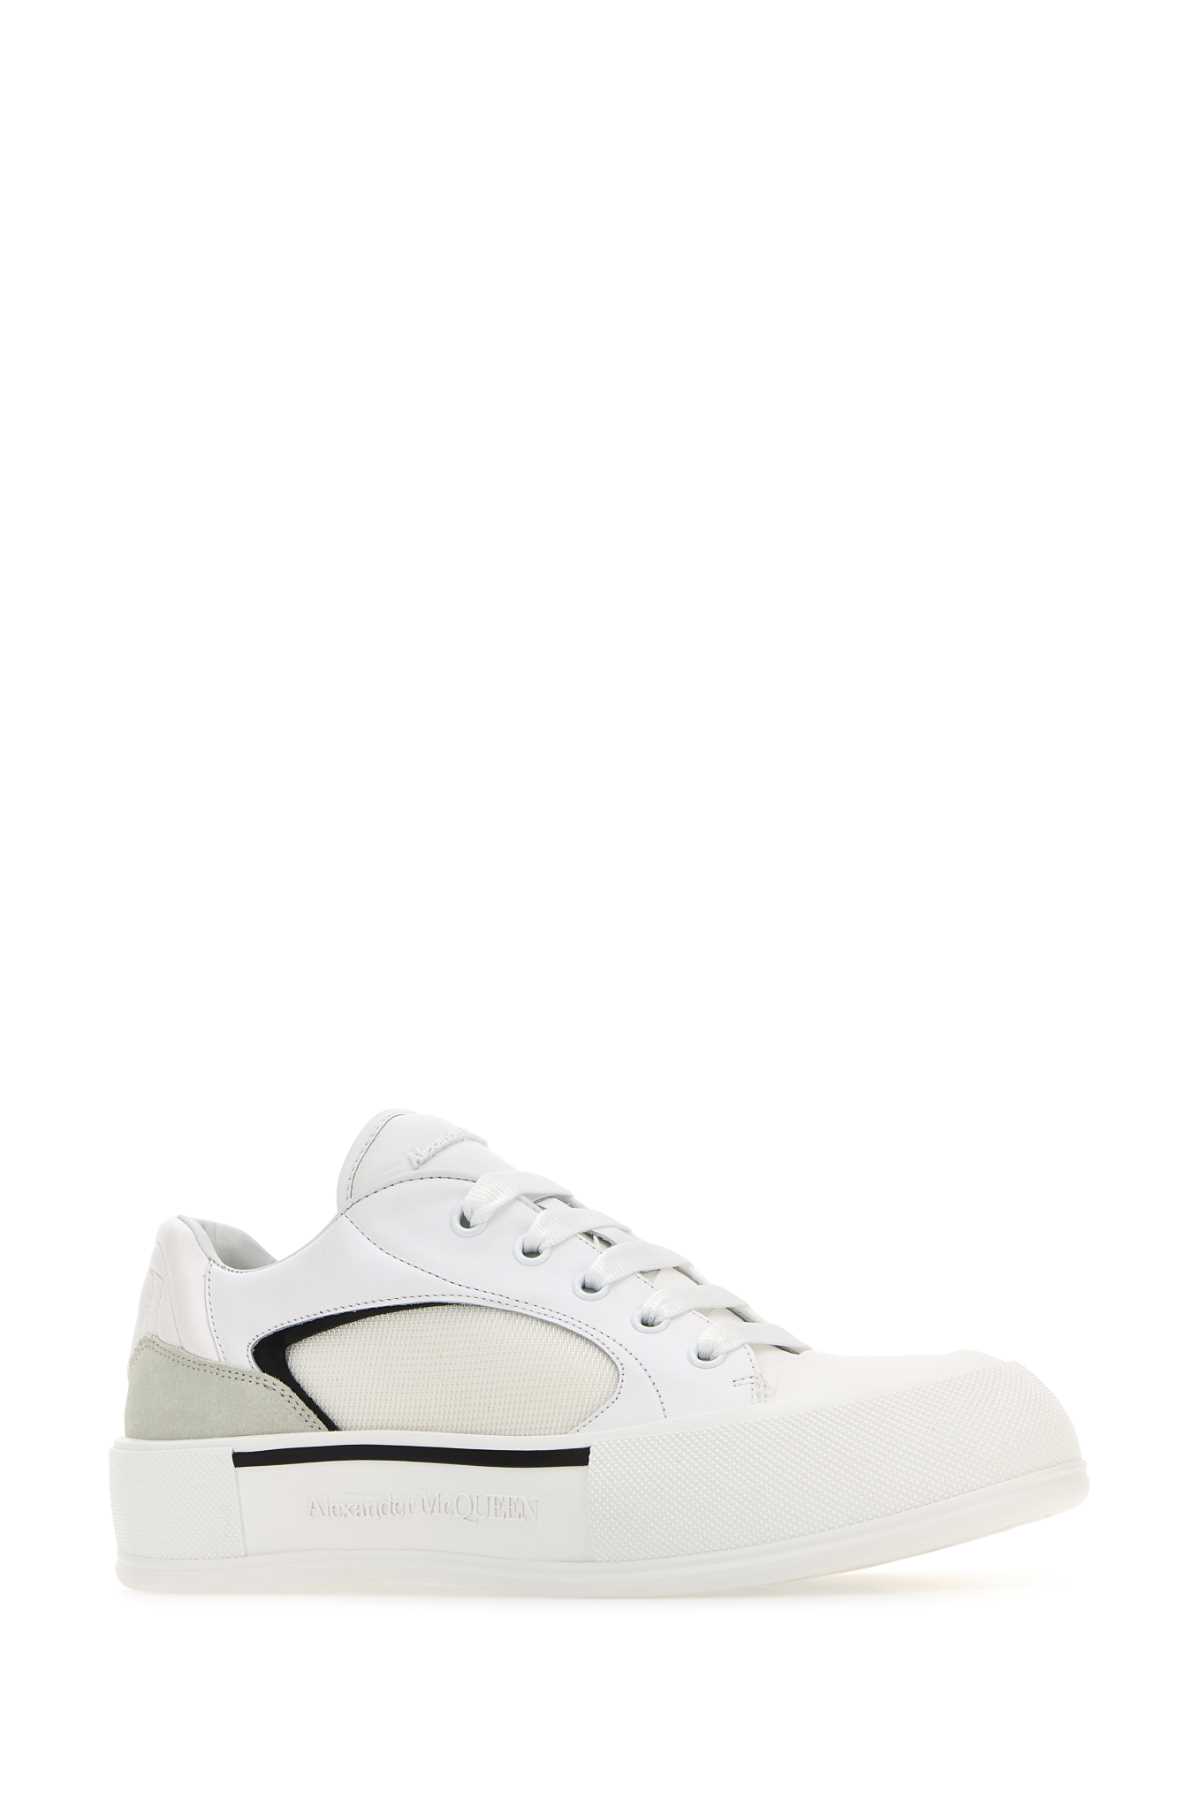 Shop Alexander Mcqueen White Canvas And Leather Plimsoll Sneakers In Whiteblack